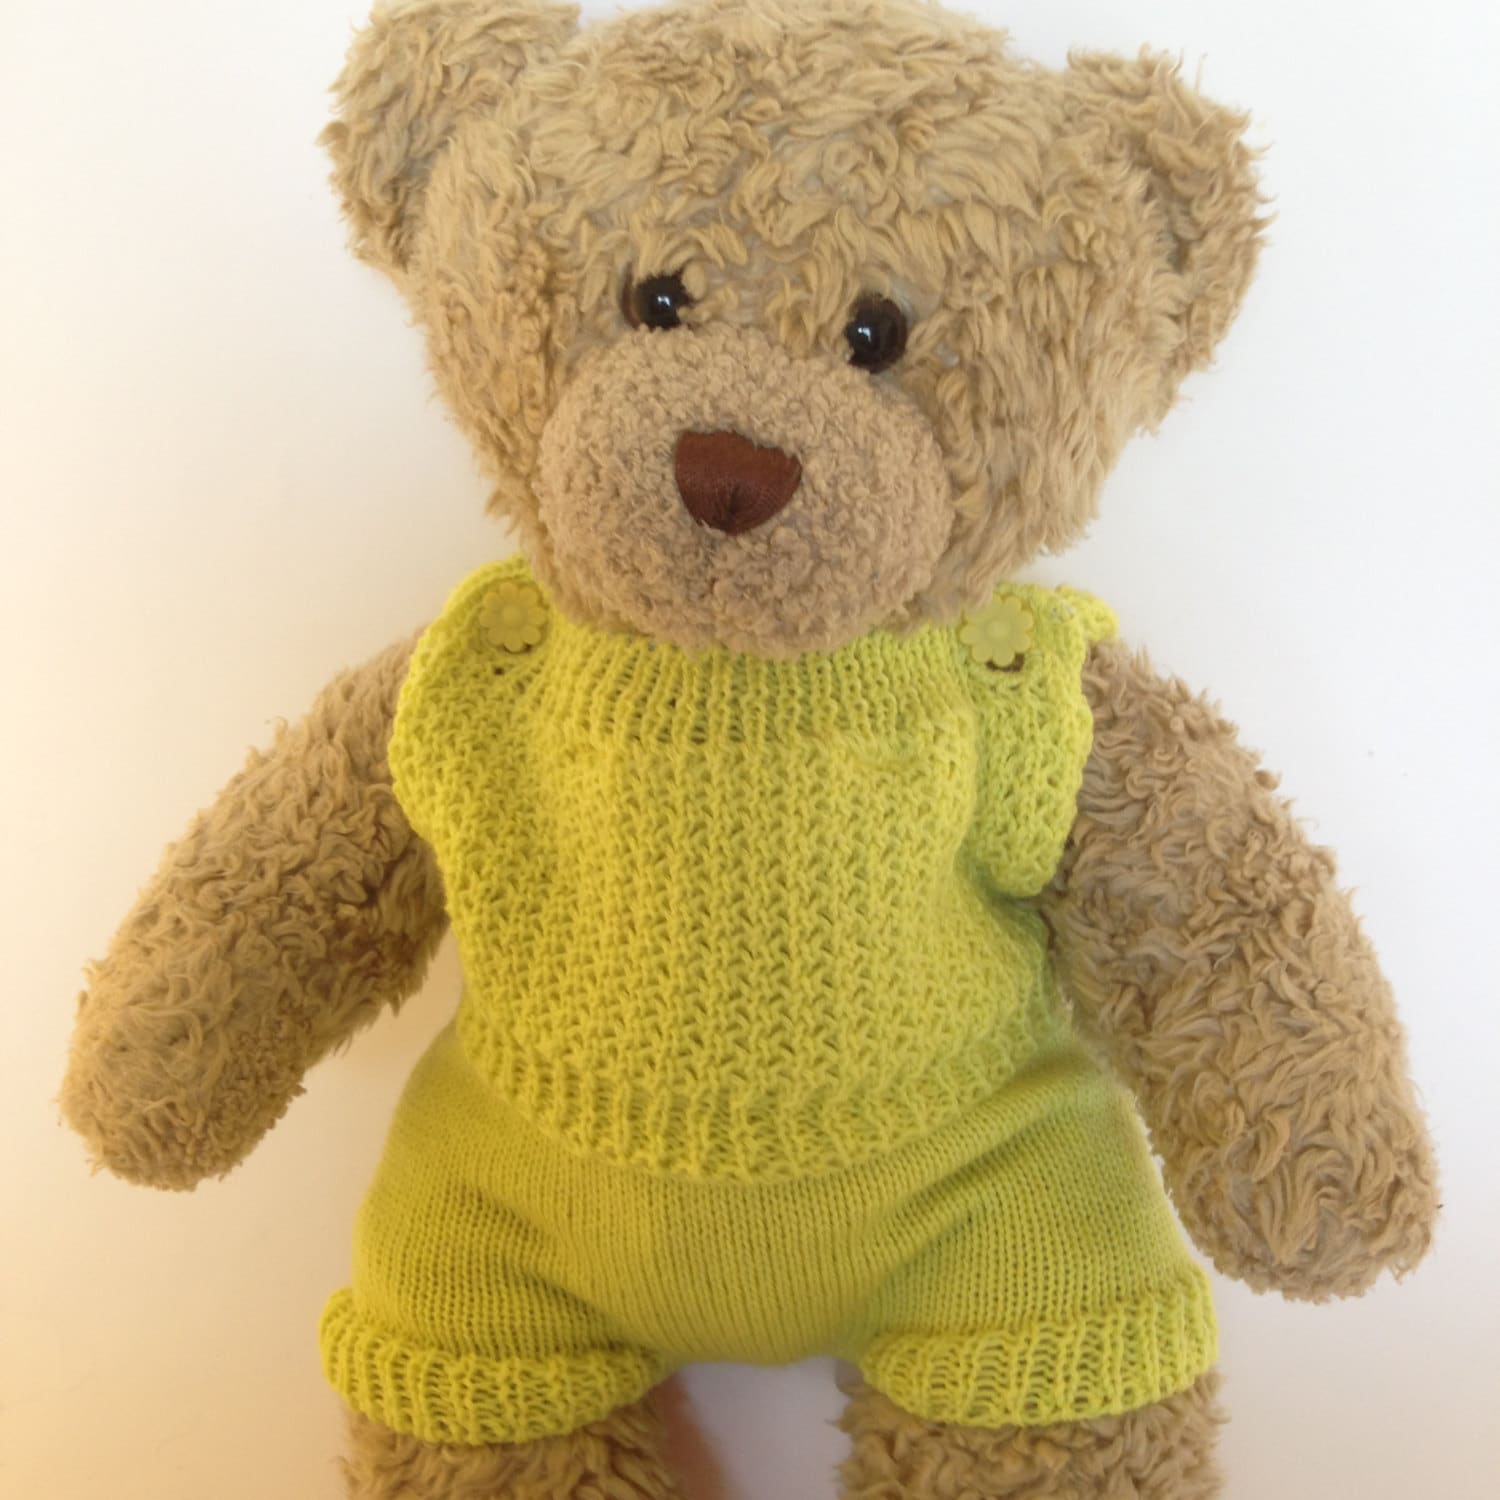 Teddy Bear Clothes 2 Piece Set of Knitted Shorts and T-shirt